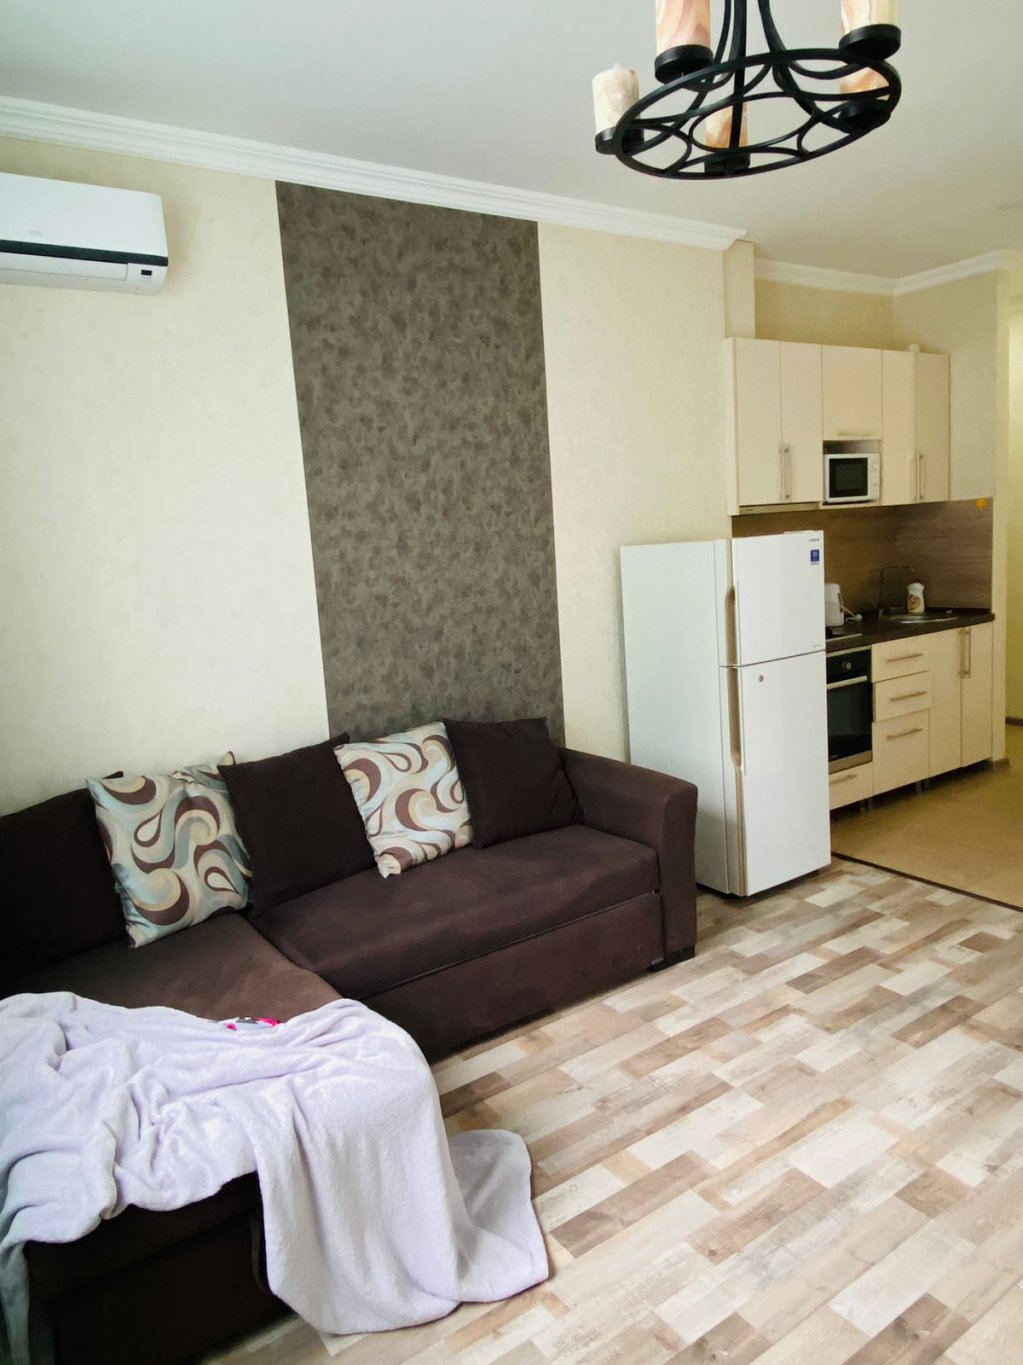 1-bedroom apartment "Nice" with sea view id-1056 -  rent an apartment in Batumi